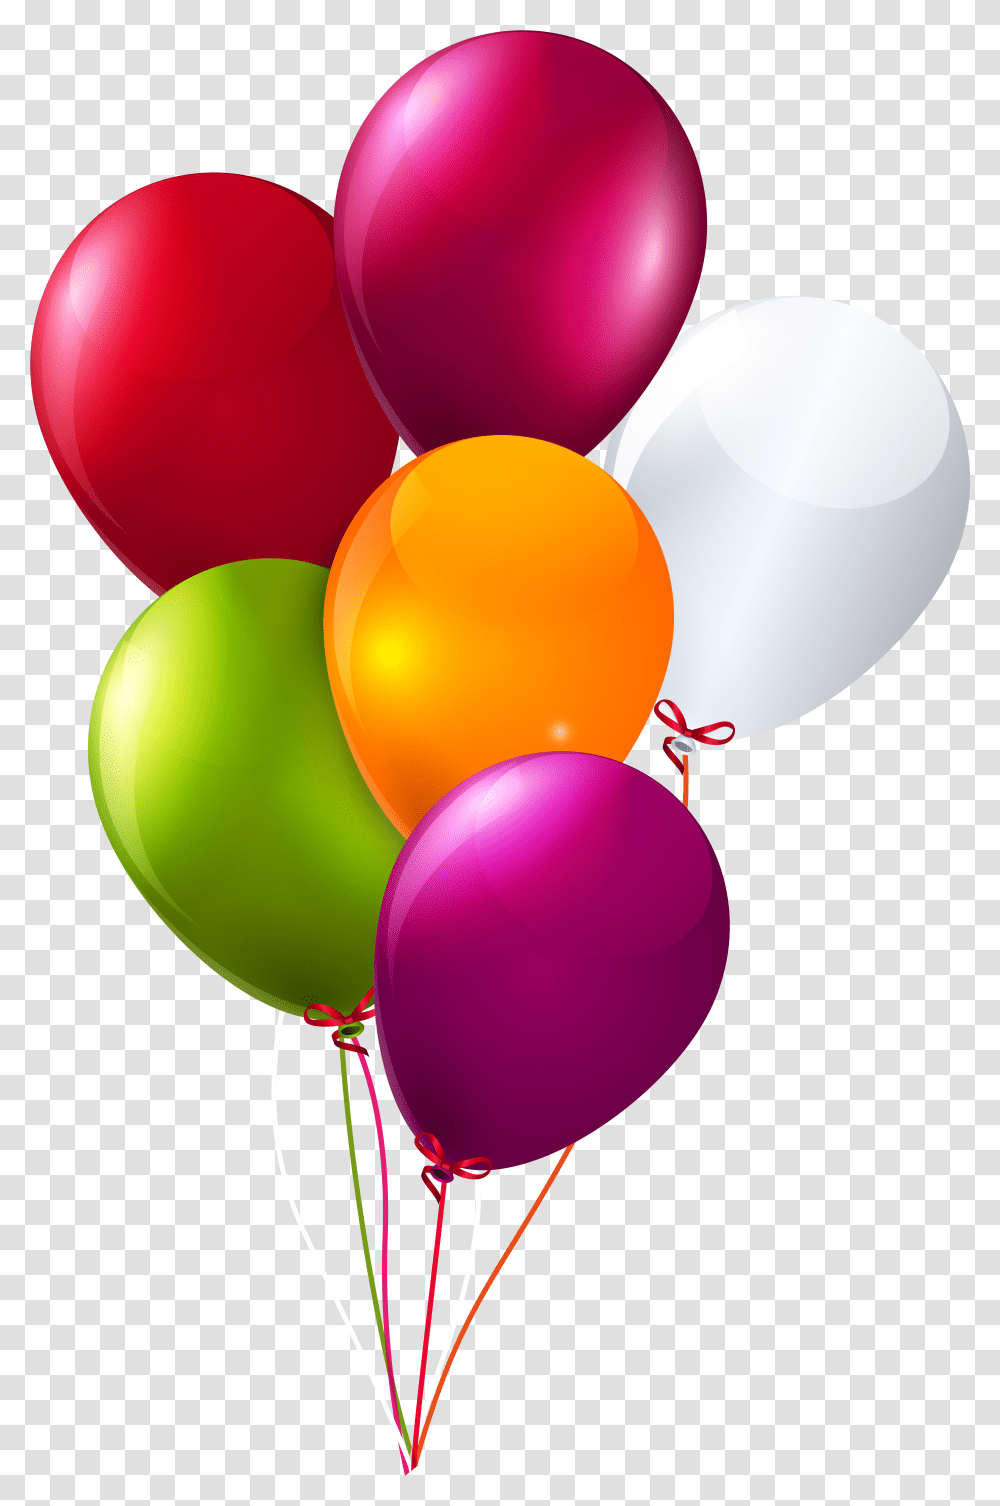 Colorful Bunch Of Balloons Clipart Image Birthday Balloons Clipart Transparent Png